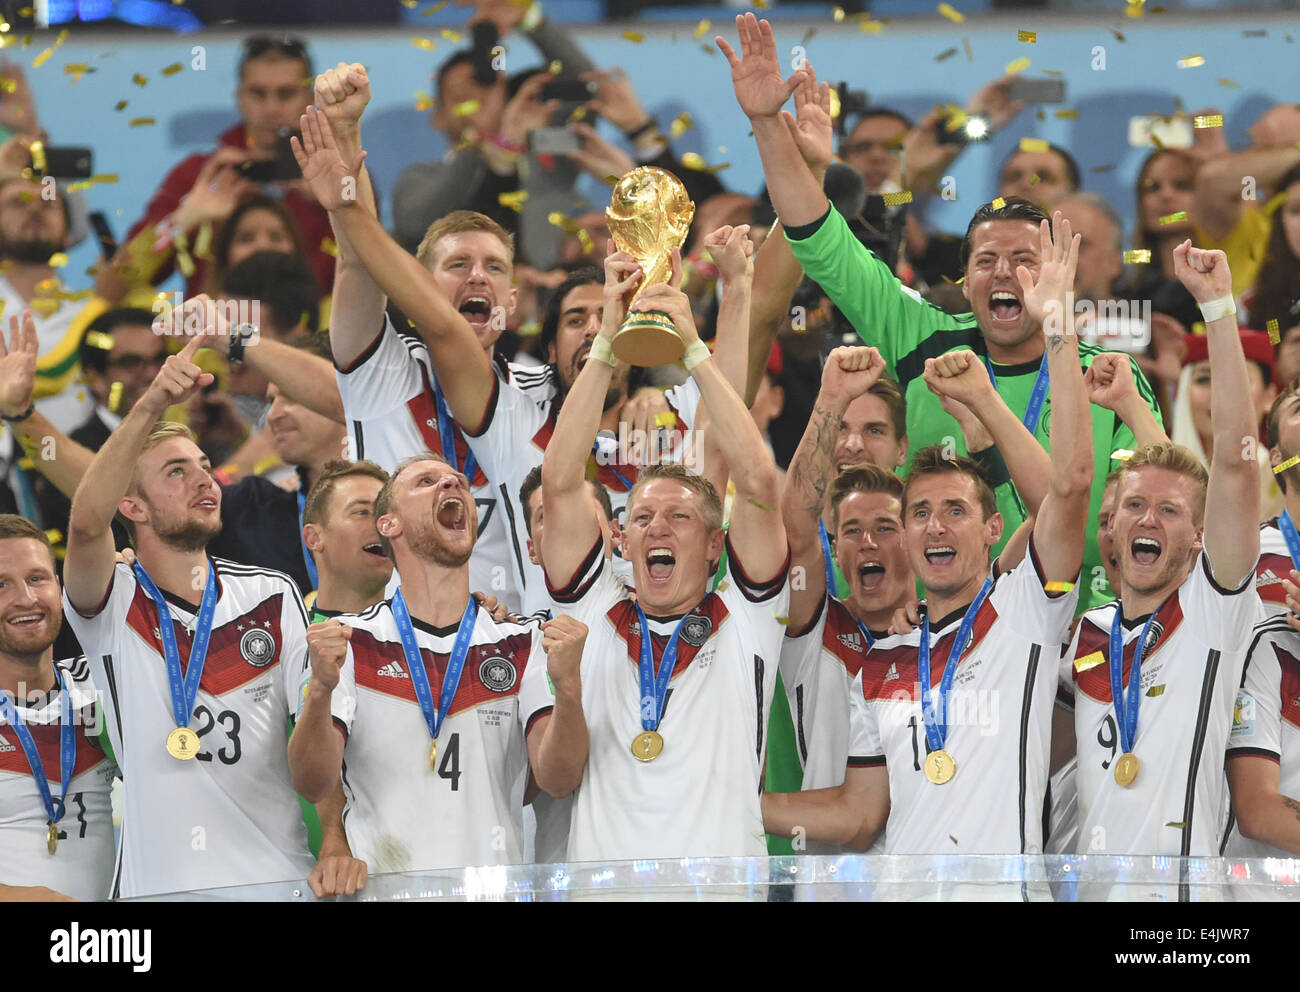 Rio de Janeiro, Brazil. 13th July, 2014. Bastian Schweinsteiger (2C) of Germany lifts up the World Cup trophy after winning the FIFA World Cup 2014 final soccer match between Germany and Argentina at the Estadio do Maracana in Rio de Janeiro, Brazil, 13 July 2014. Photo: Andreas Gebert/dpa/Alamy Live News Stock Photo